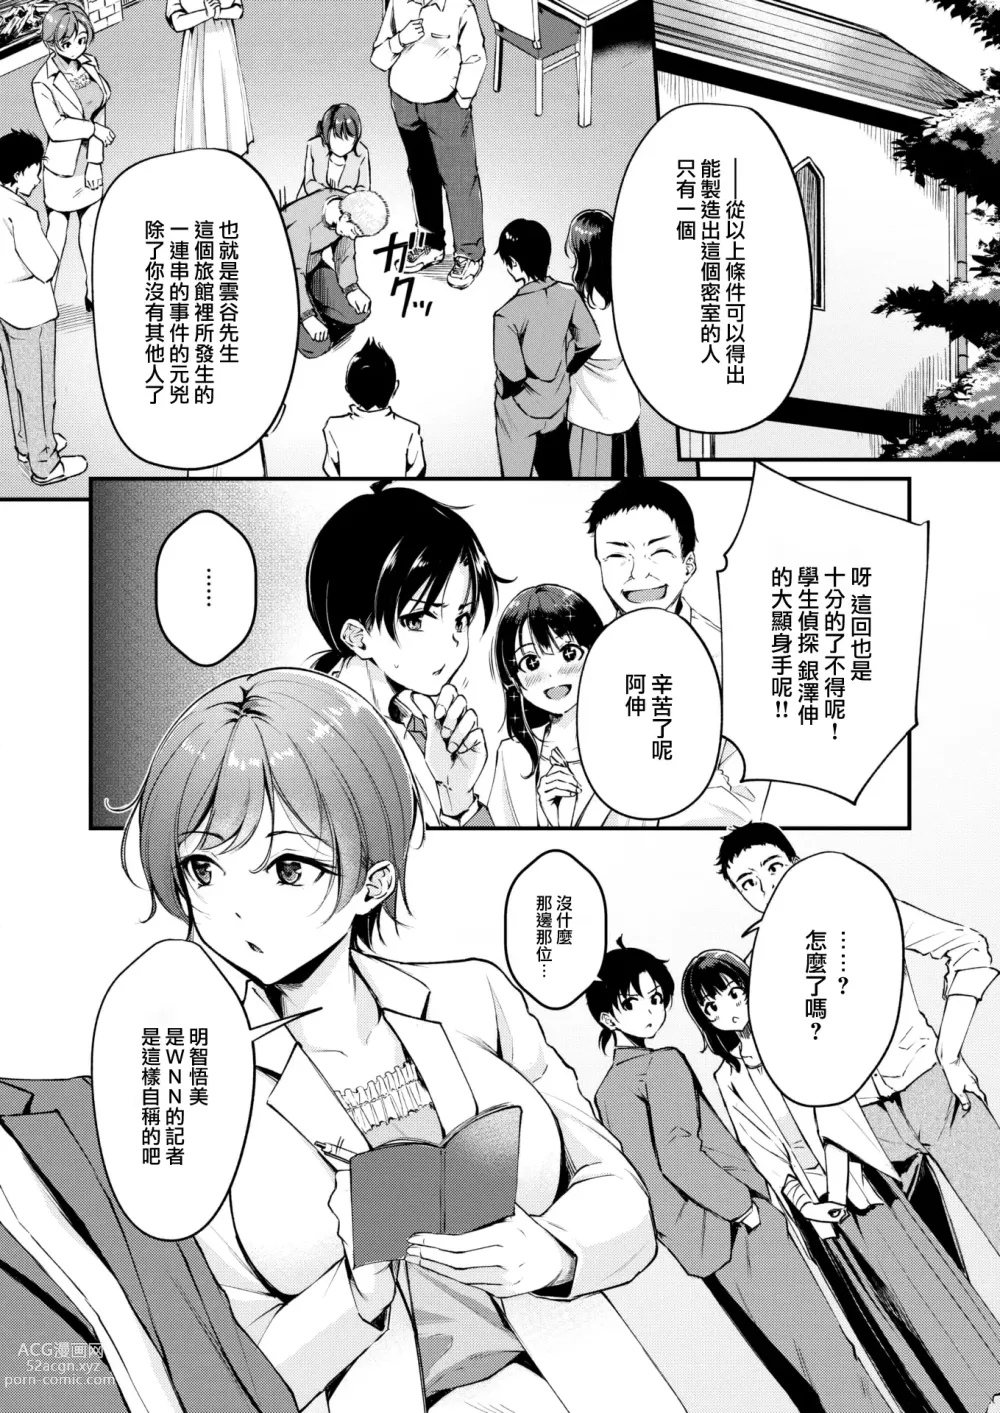 Page 3 of doujinshi えっちは謎解きのあとで